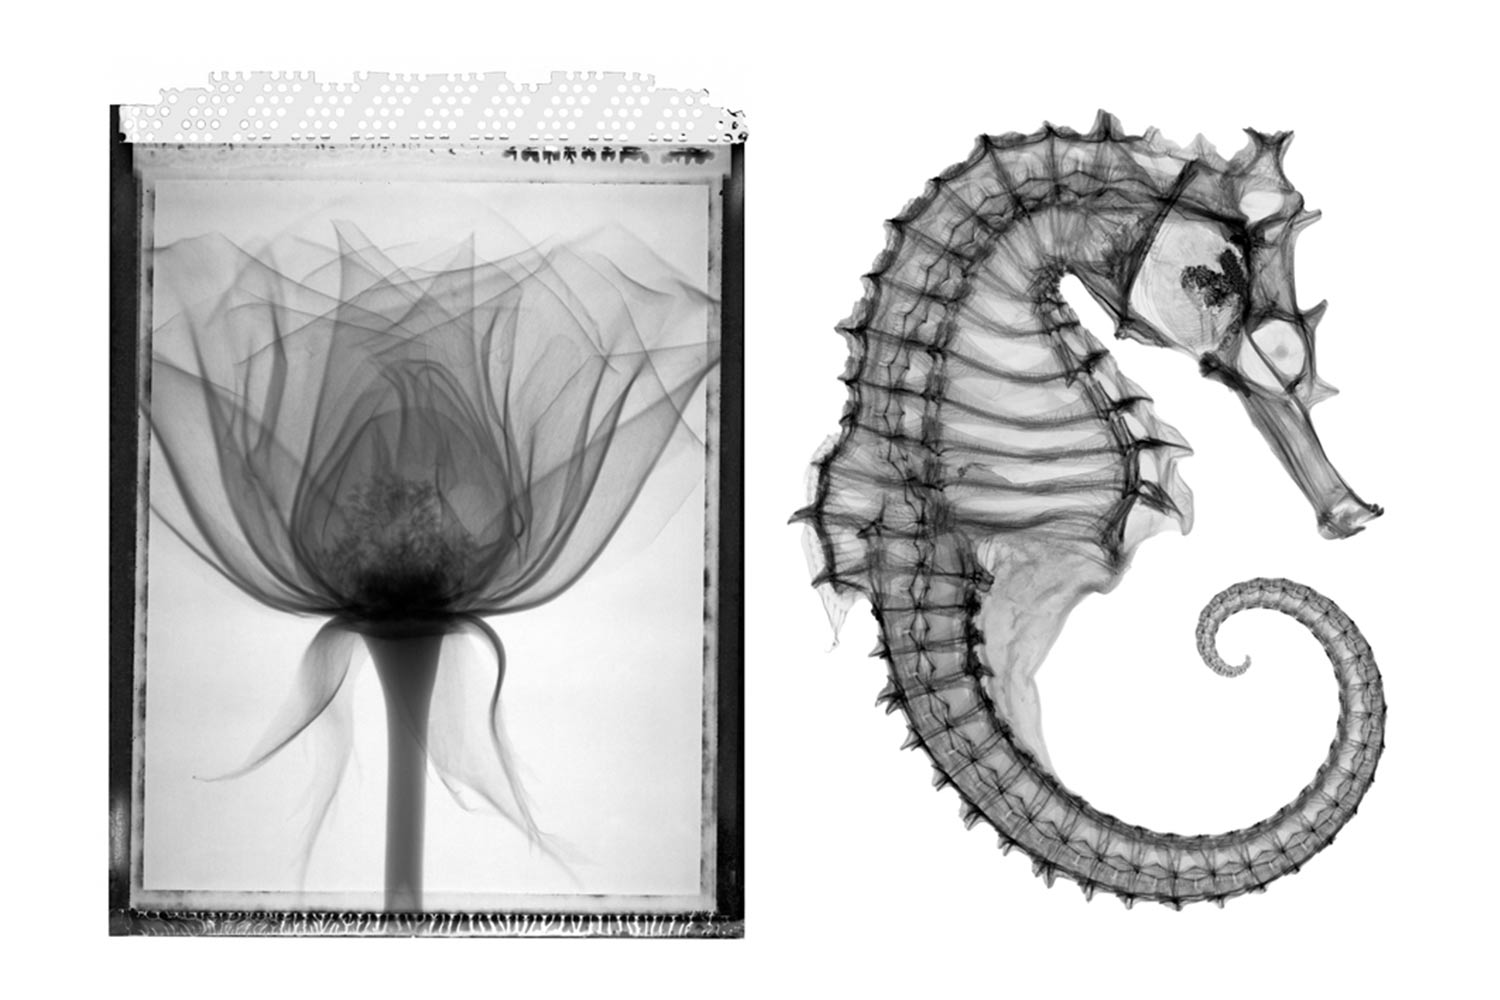 B&W x-ray photograph of a flower and a seahorse